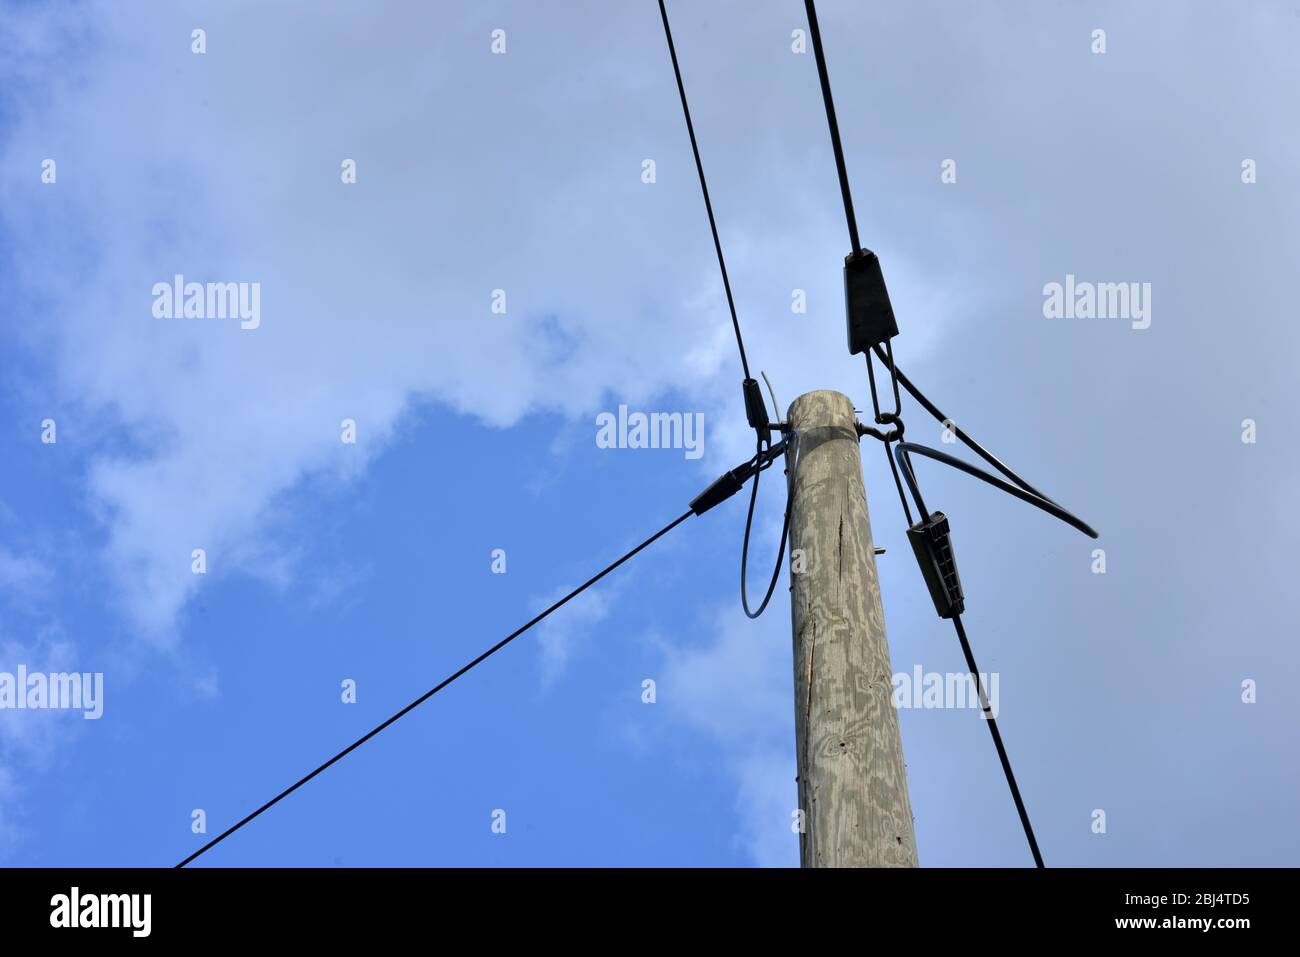 electric power lines and wooden pole Stock Photo